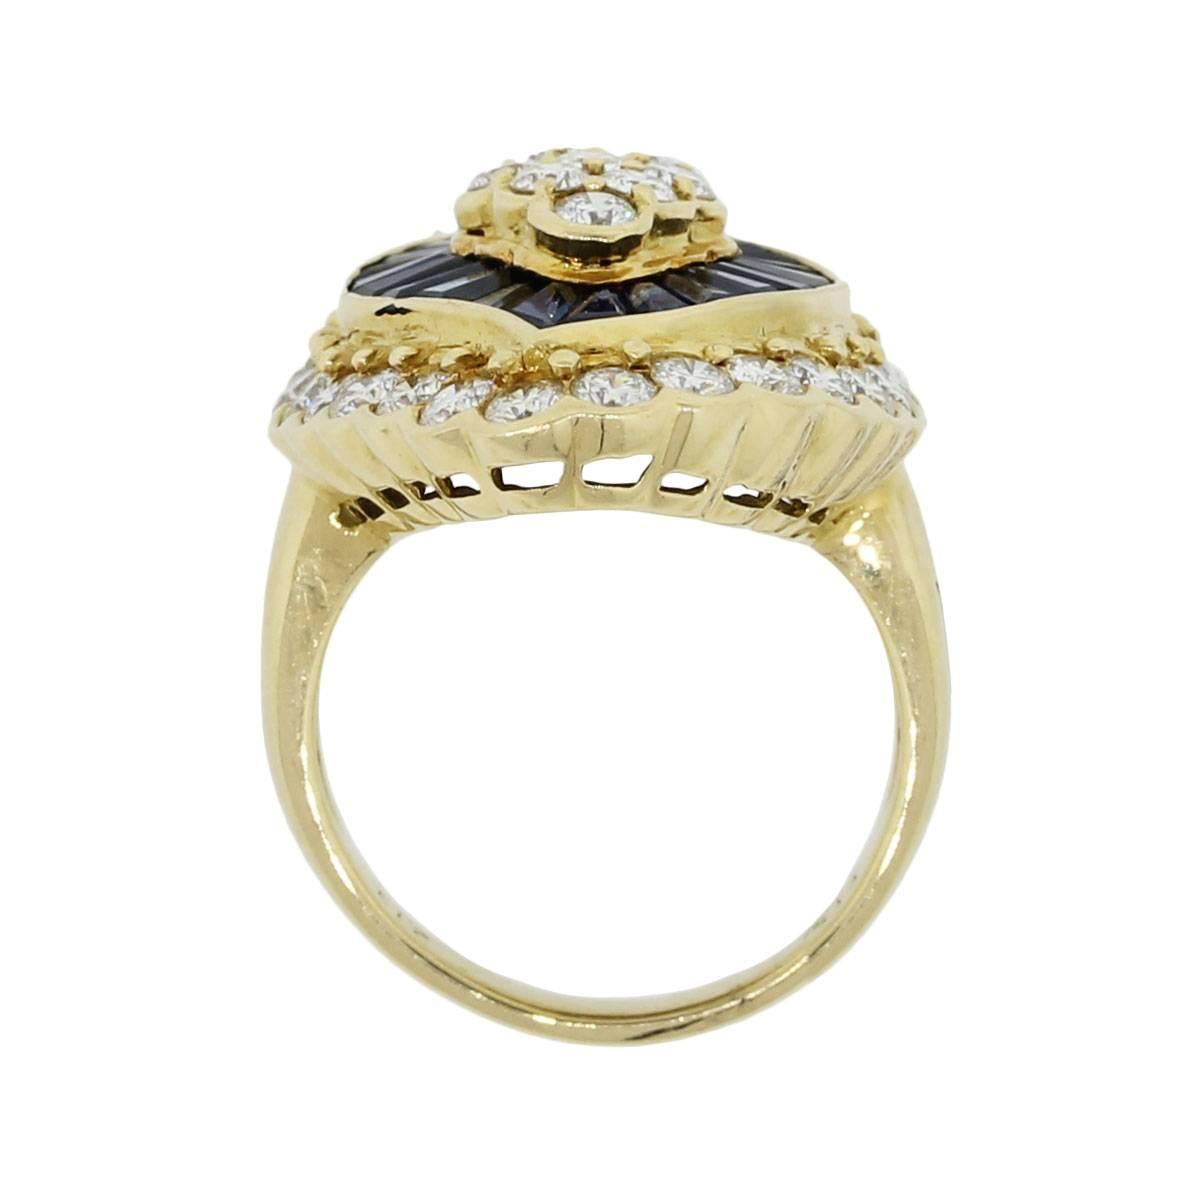 Material: 18k yellow gold
Diamond Details: Approximately 3.67ctw of round brilliant diamonds. Diamonds are G/H in color and SI in clarity.
Gemstone Details: Approximately 2.13ctw of baguette shape sapphires
Ring Measurements: 1.18″ x 1.12″ x